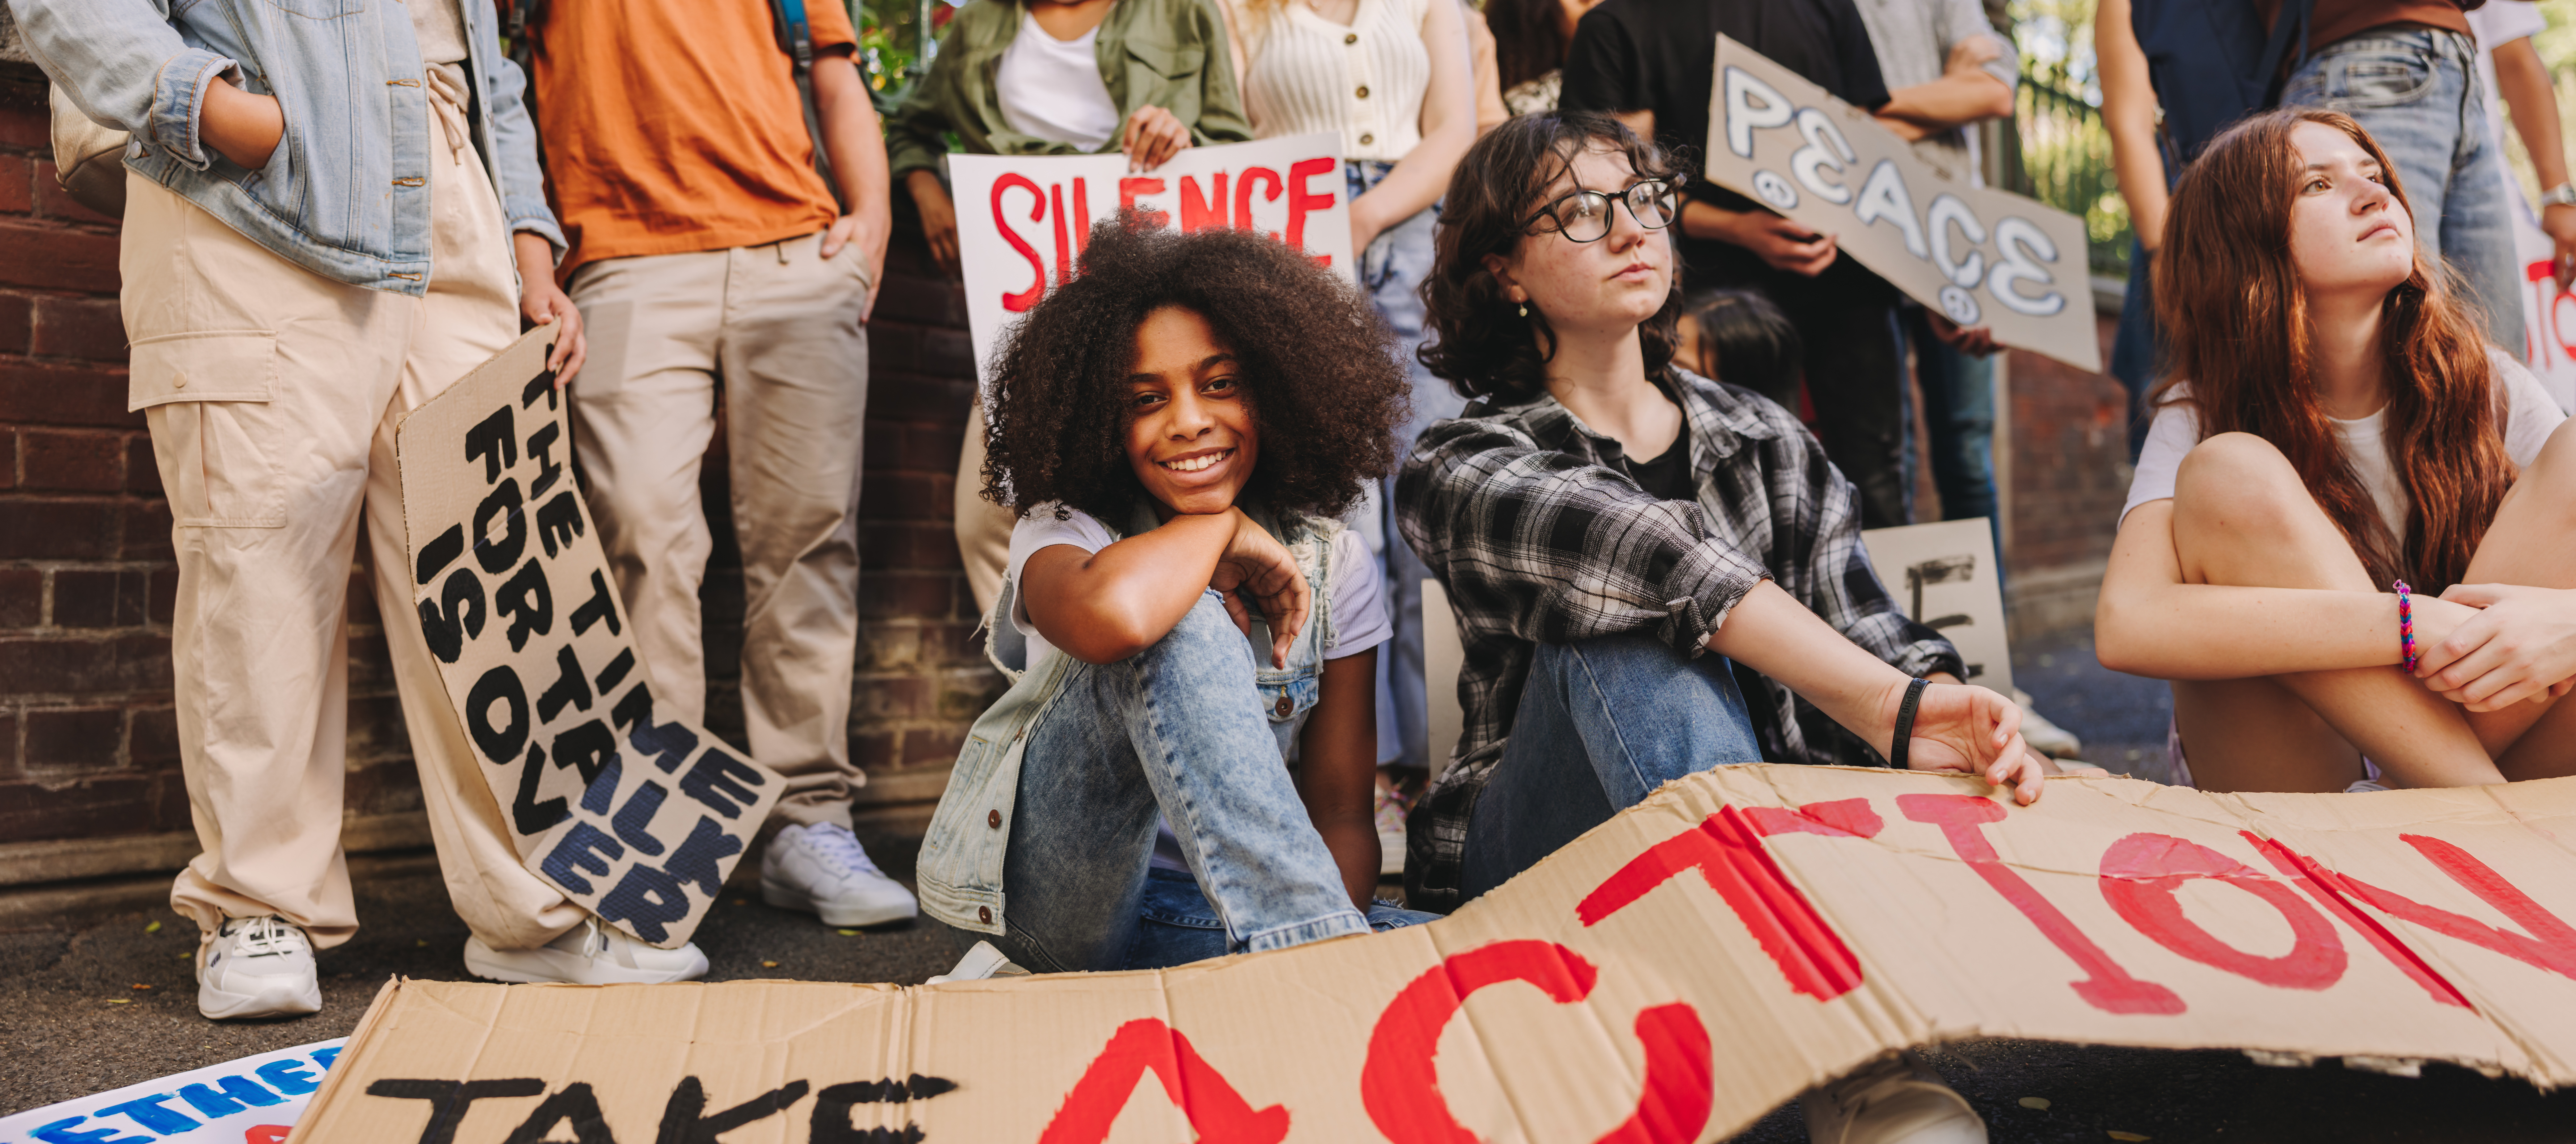 photo of diverse gen z teens and young adults taking a stand for social justice. Gen Z activists